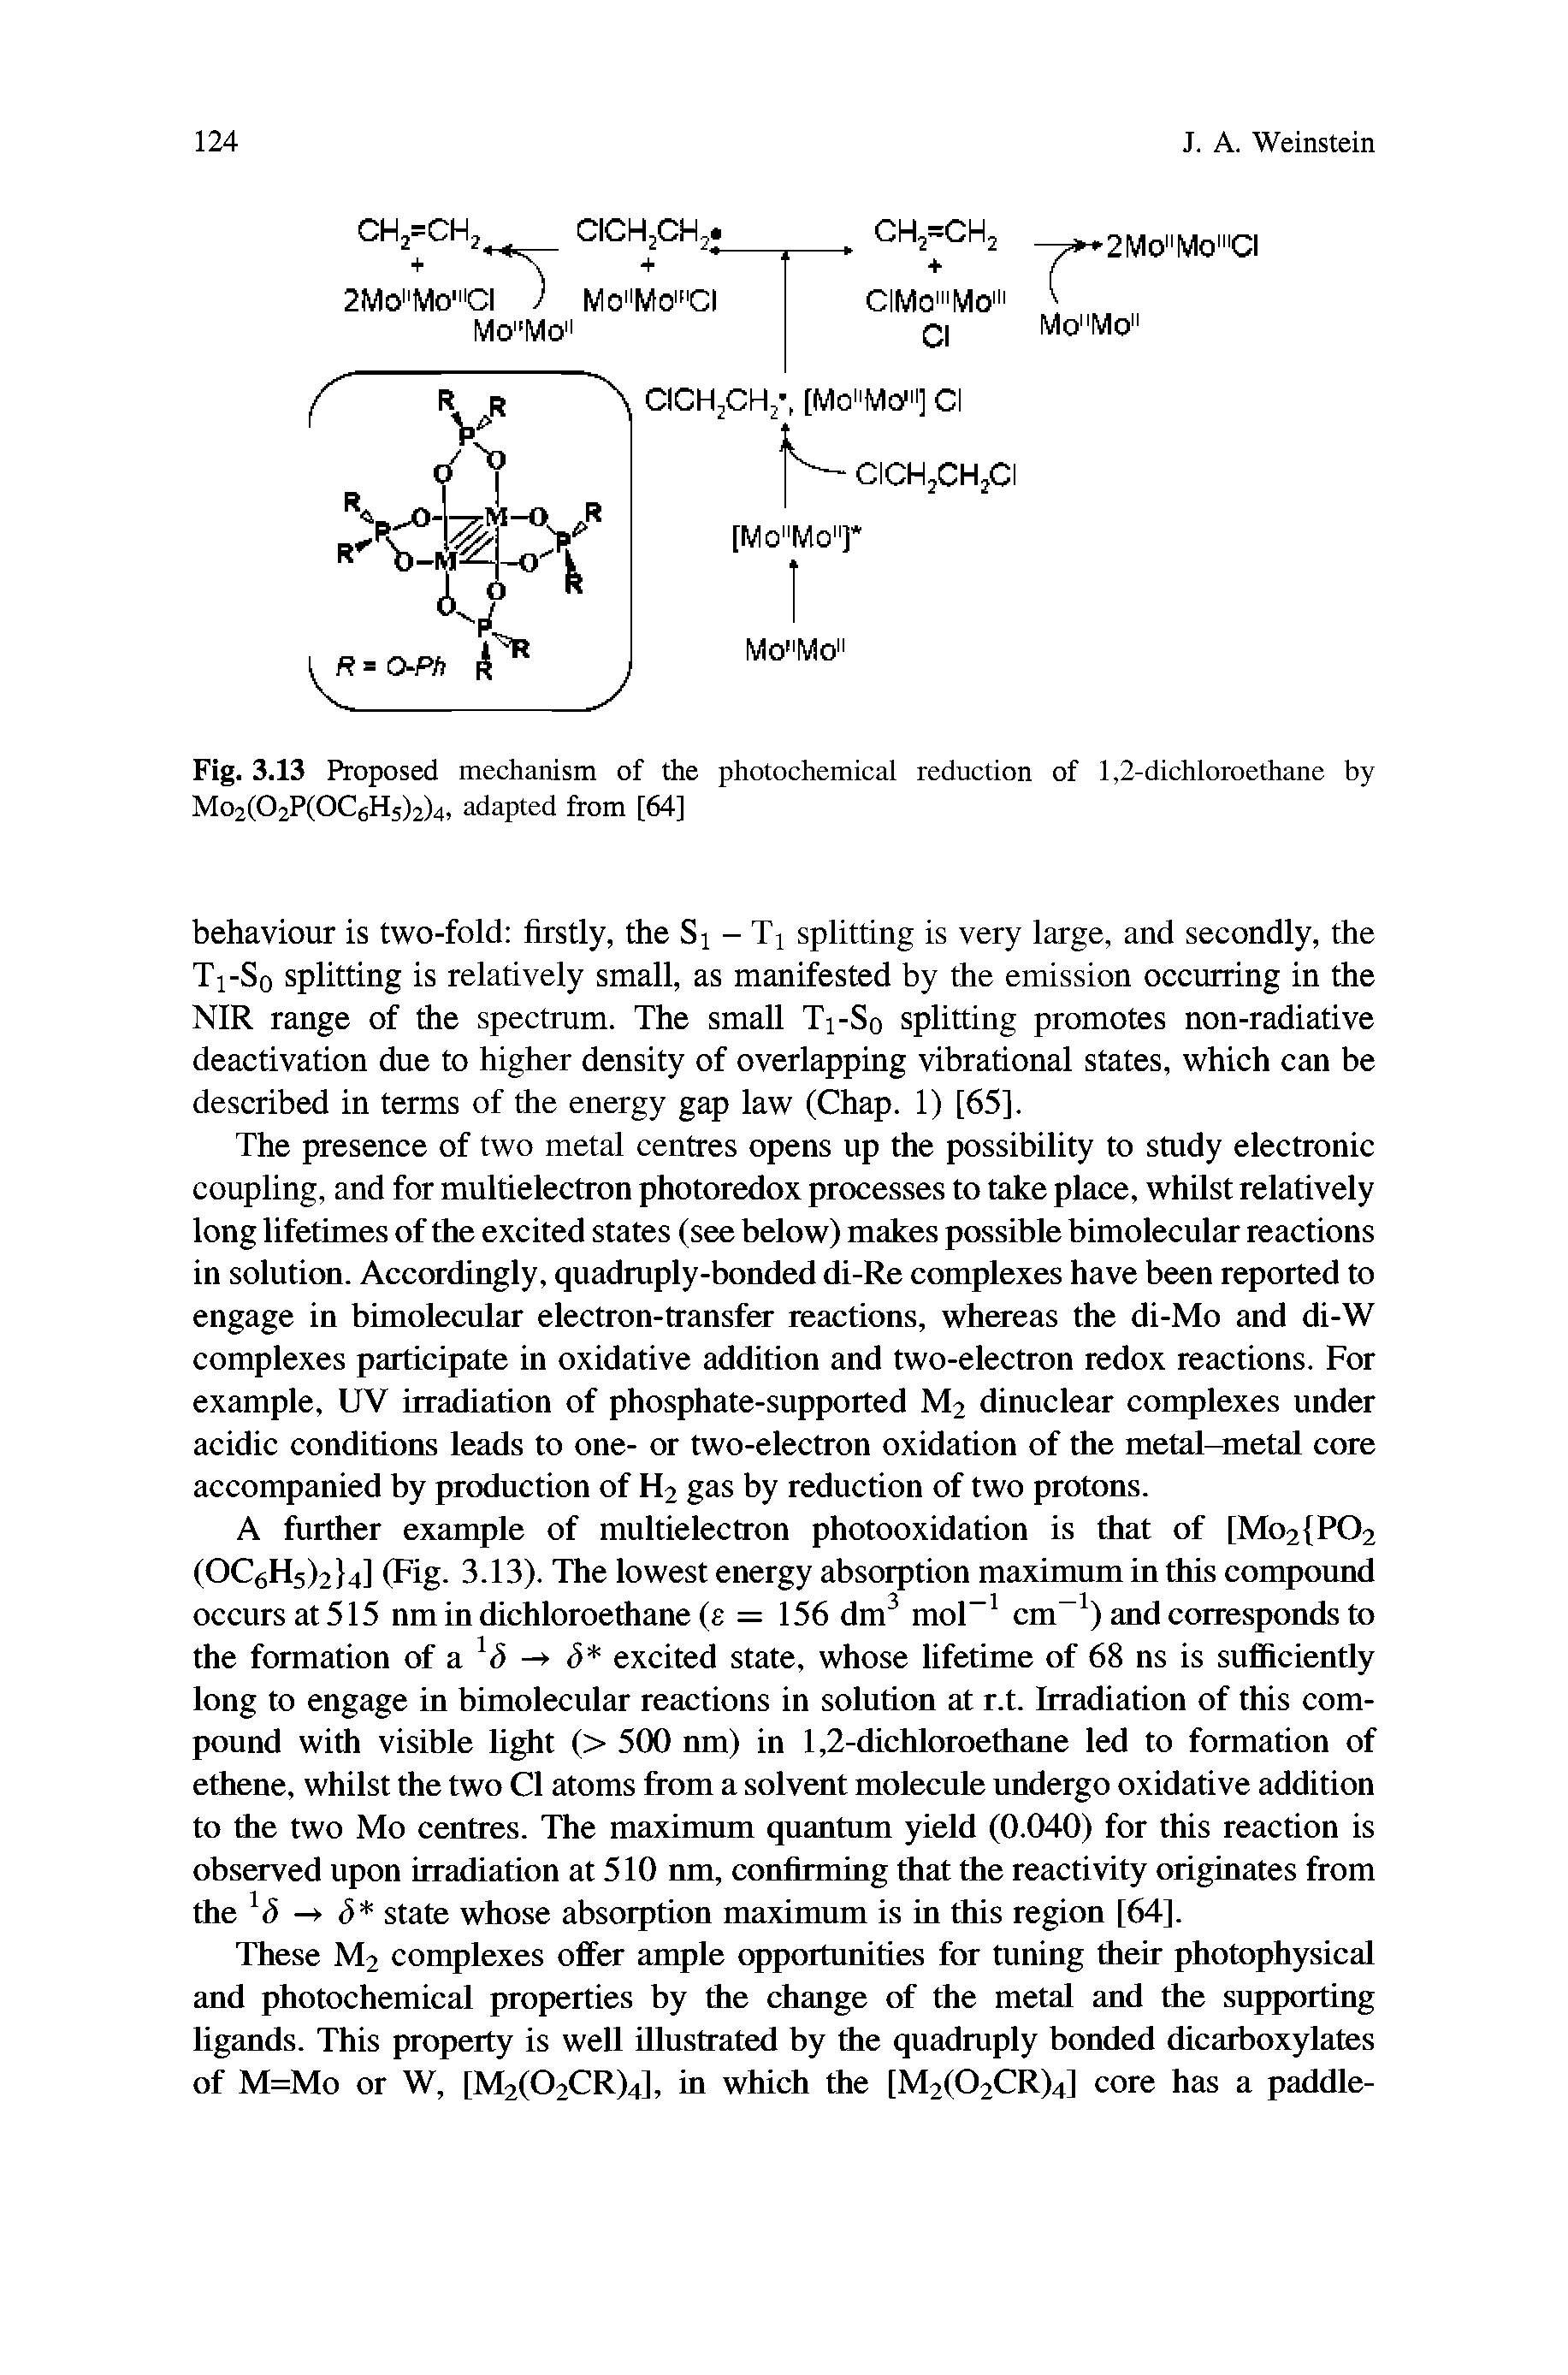 Fig. 3.13 Proposed mechanism of the photochemical reduction of 1,2-dichloroethane by Mo2(02P(OCgH5)2)4, adapted from [64]...